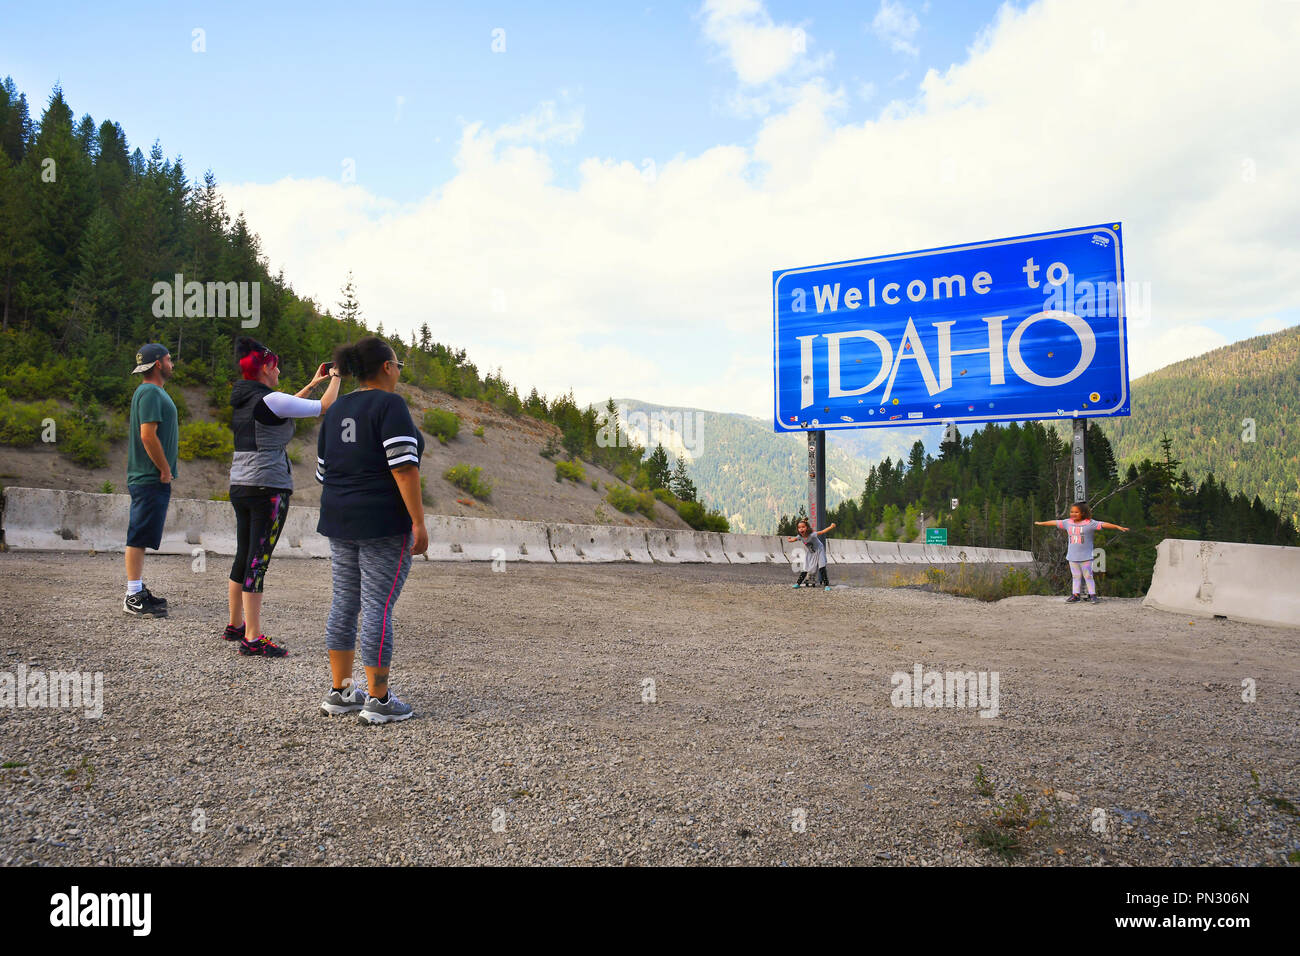 LOOKOUT PASS, IDAHO, USA - September 1, 2018: Family of five stop to take pictures at the Welcome to Idaho road sign Stock Photo